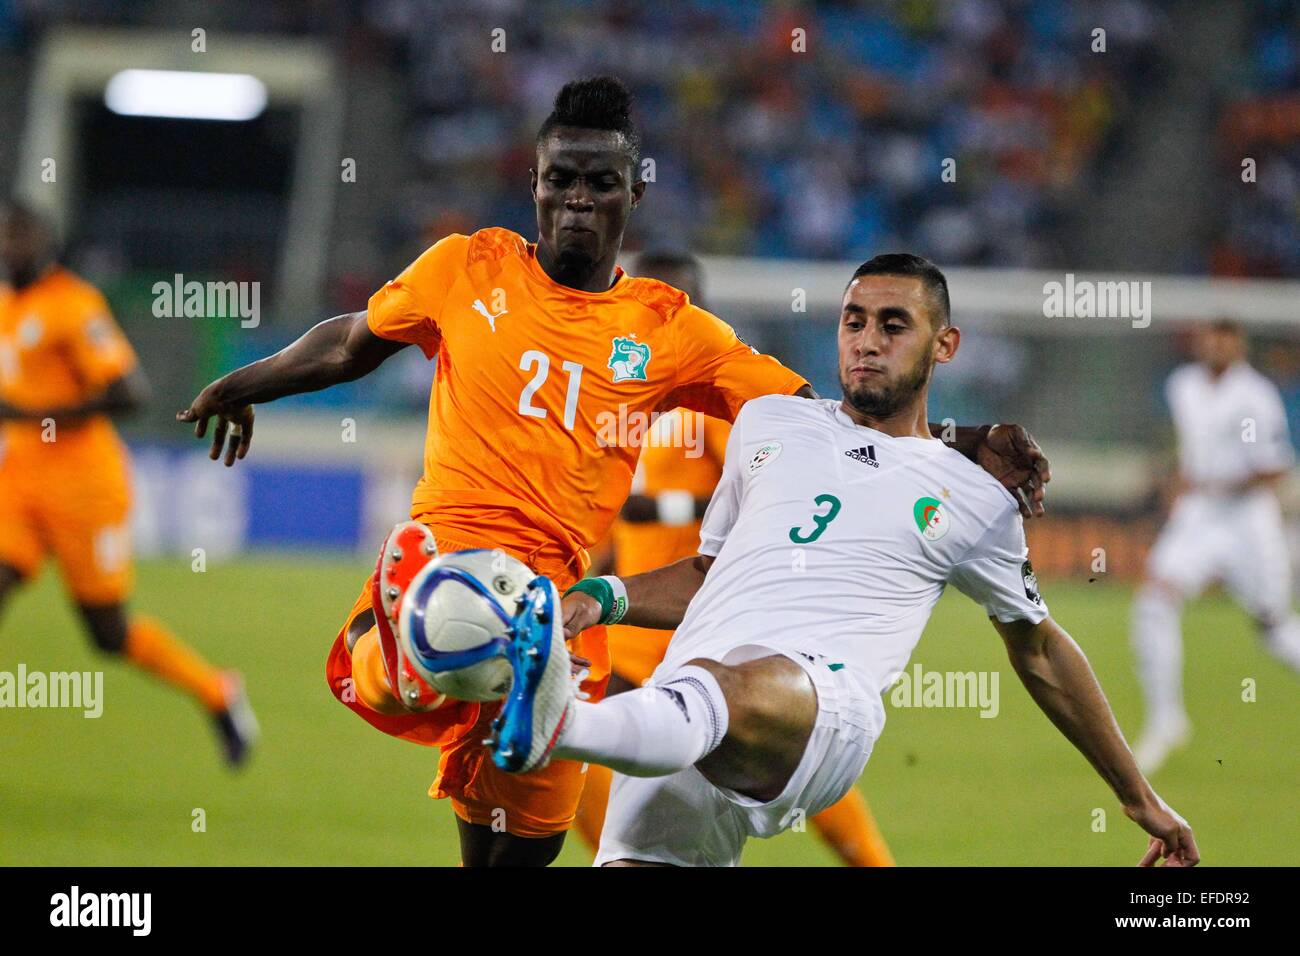 Malabo, Equatorial Guinea. 1st Feb, 2015. Faouzi Ghoulam (R) of Algeria vies with Eric Bertrand Bailly of Cote d'Ivoire during a quarterfinal match of Africa Cup of Nations in Malabo, Equatorial Guinea, Feb. 1, 2015. Cote d'Ivoire won 3-1. Credit:  Li Jing/Xinhua/Alamy Live News Stock Photo